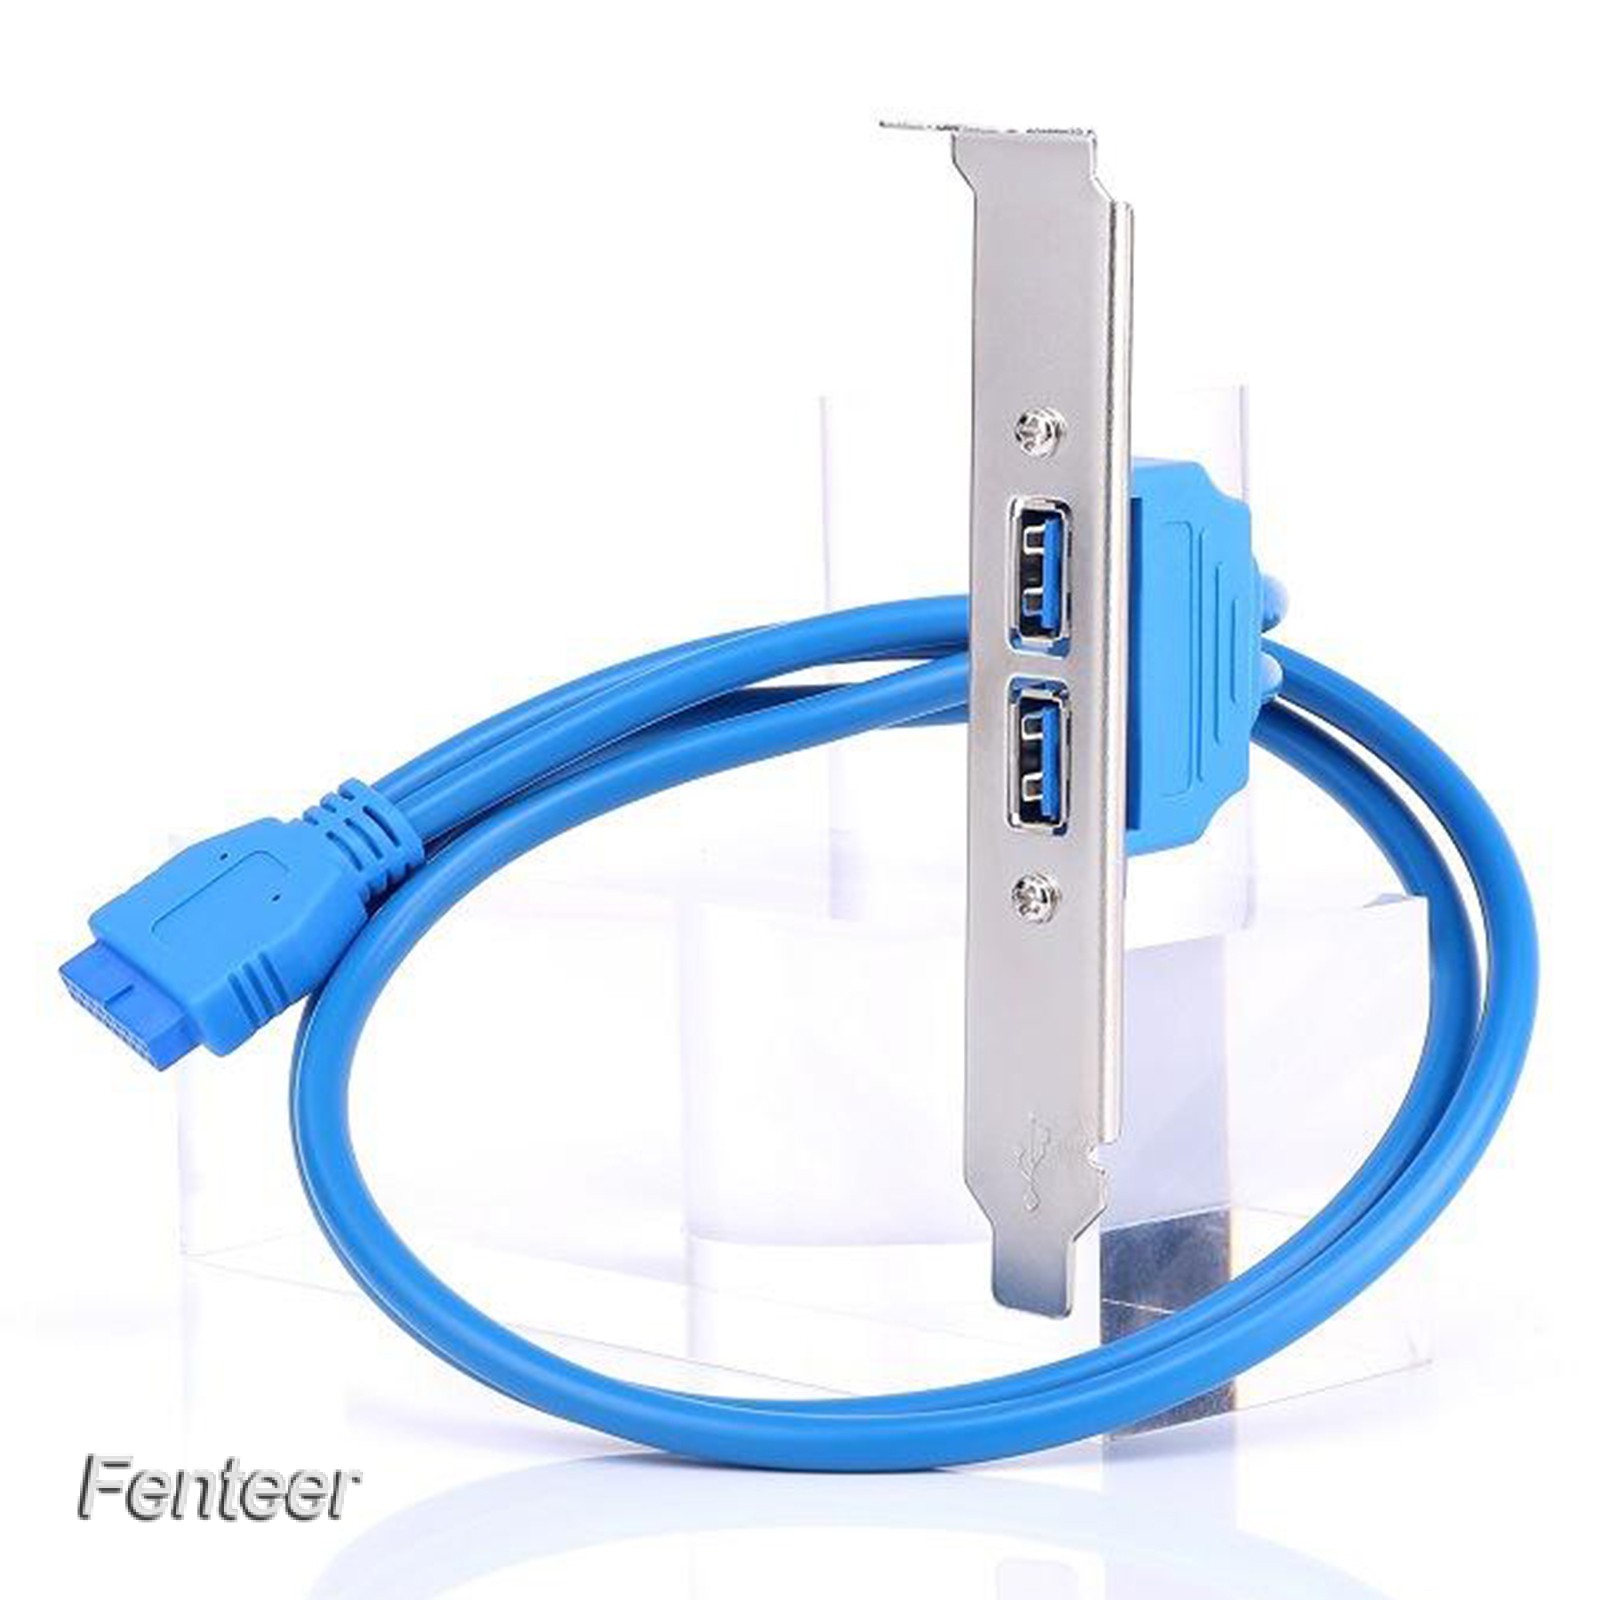 [FENTEER] 2 Ports USB 3.0 Back Panel Mount to 20pin Header Cable with PCI Bracket 50cm